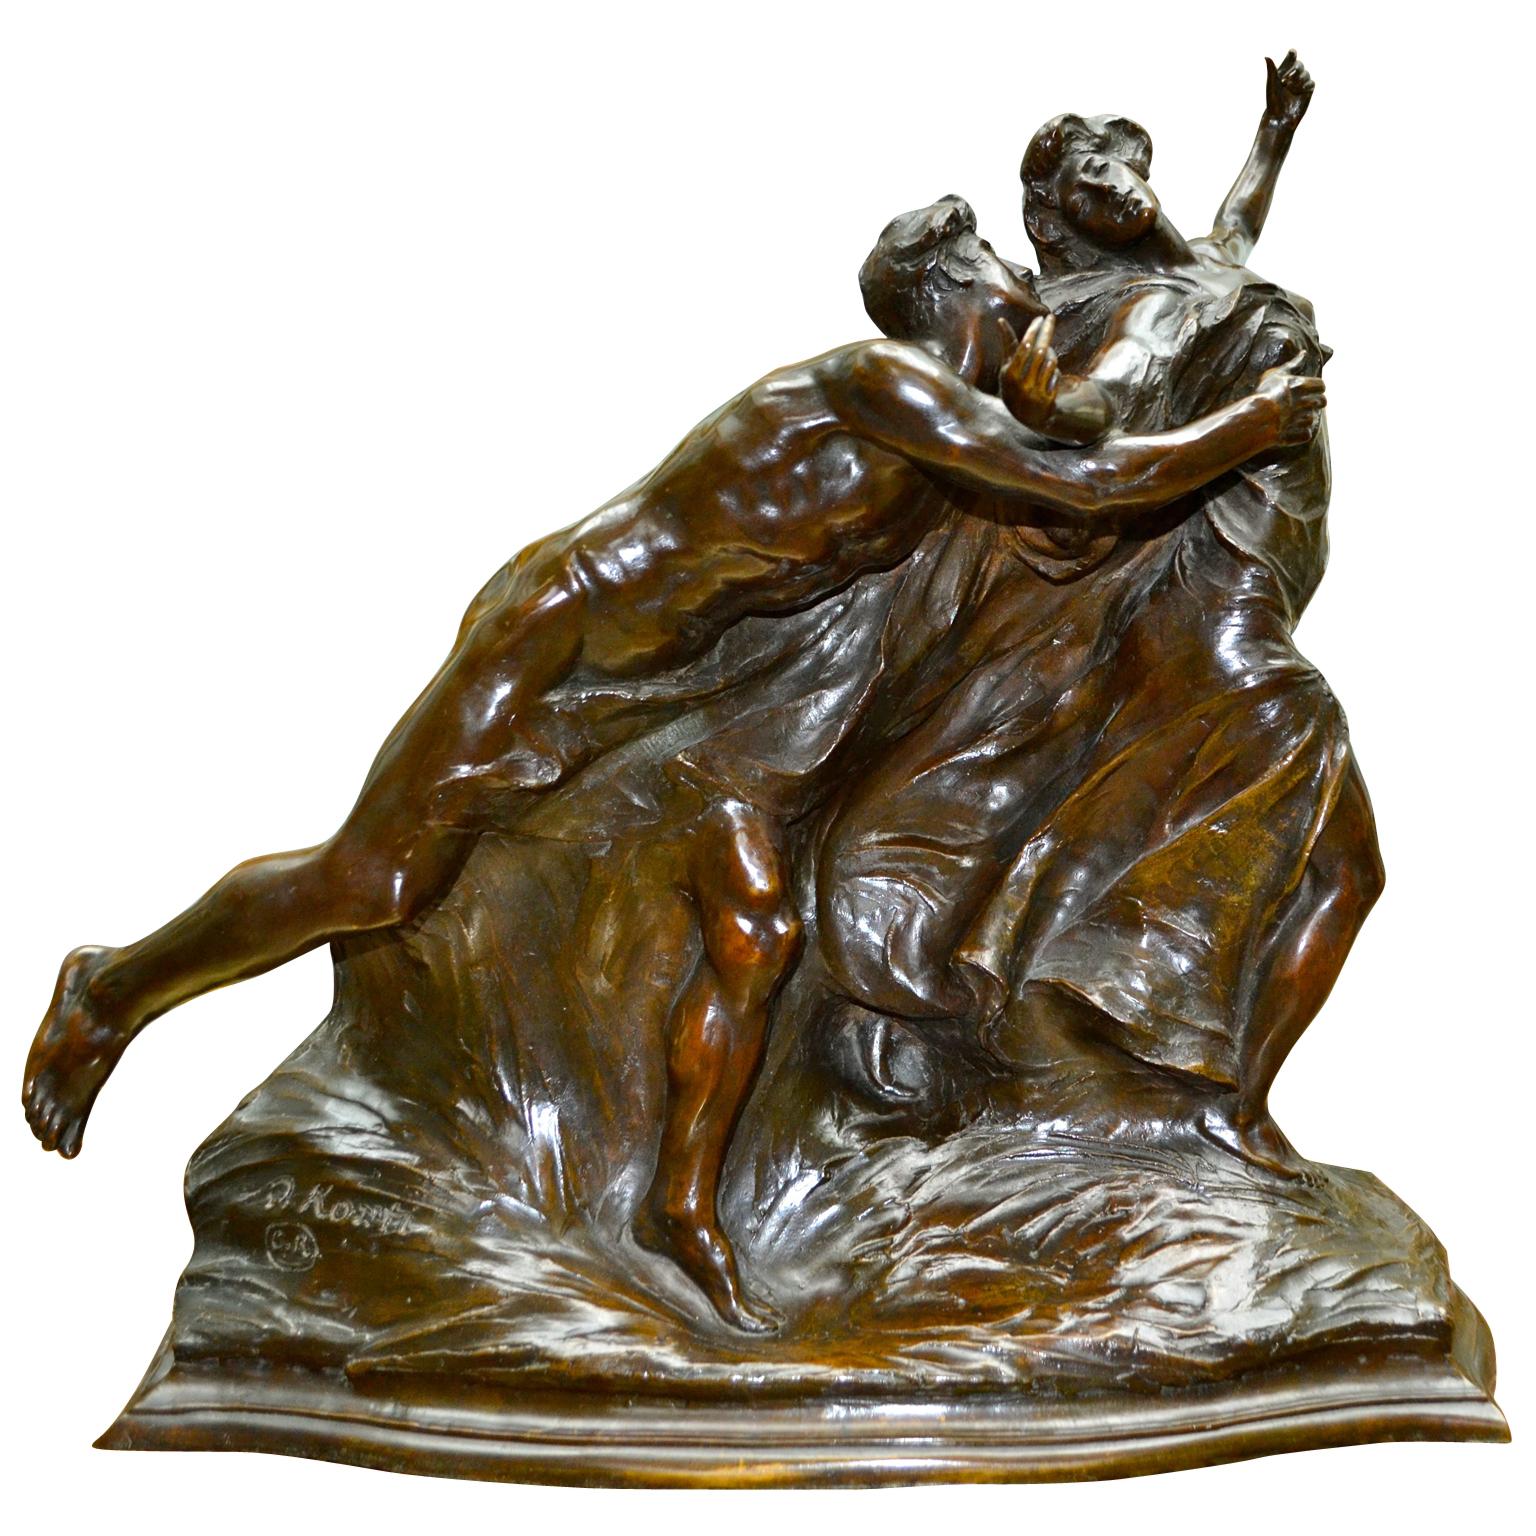 An allegory of “The Pursuit of Happiness” A wonderful ‘fluid’ bronze statue depicting a nude young man pursuing a classically draped woman, her long robes flowing in the wind, reminiscent of the style of Rodin; the bronze with dark brown patina is